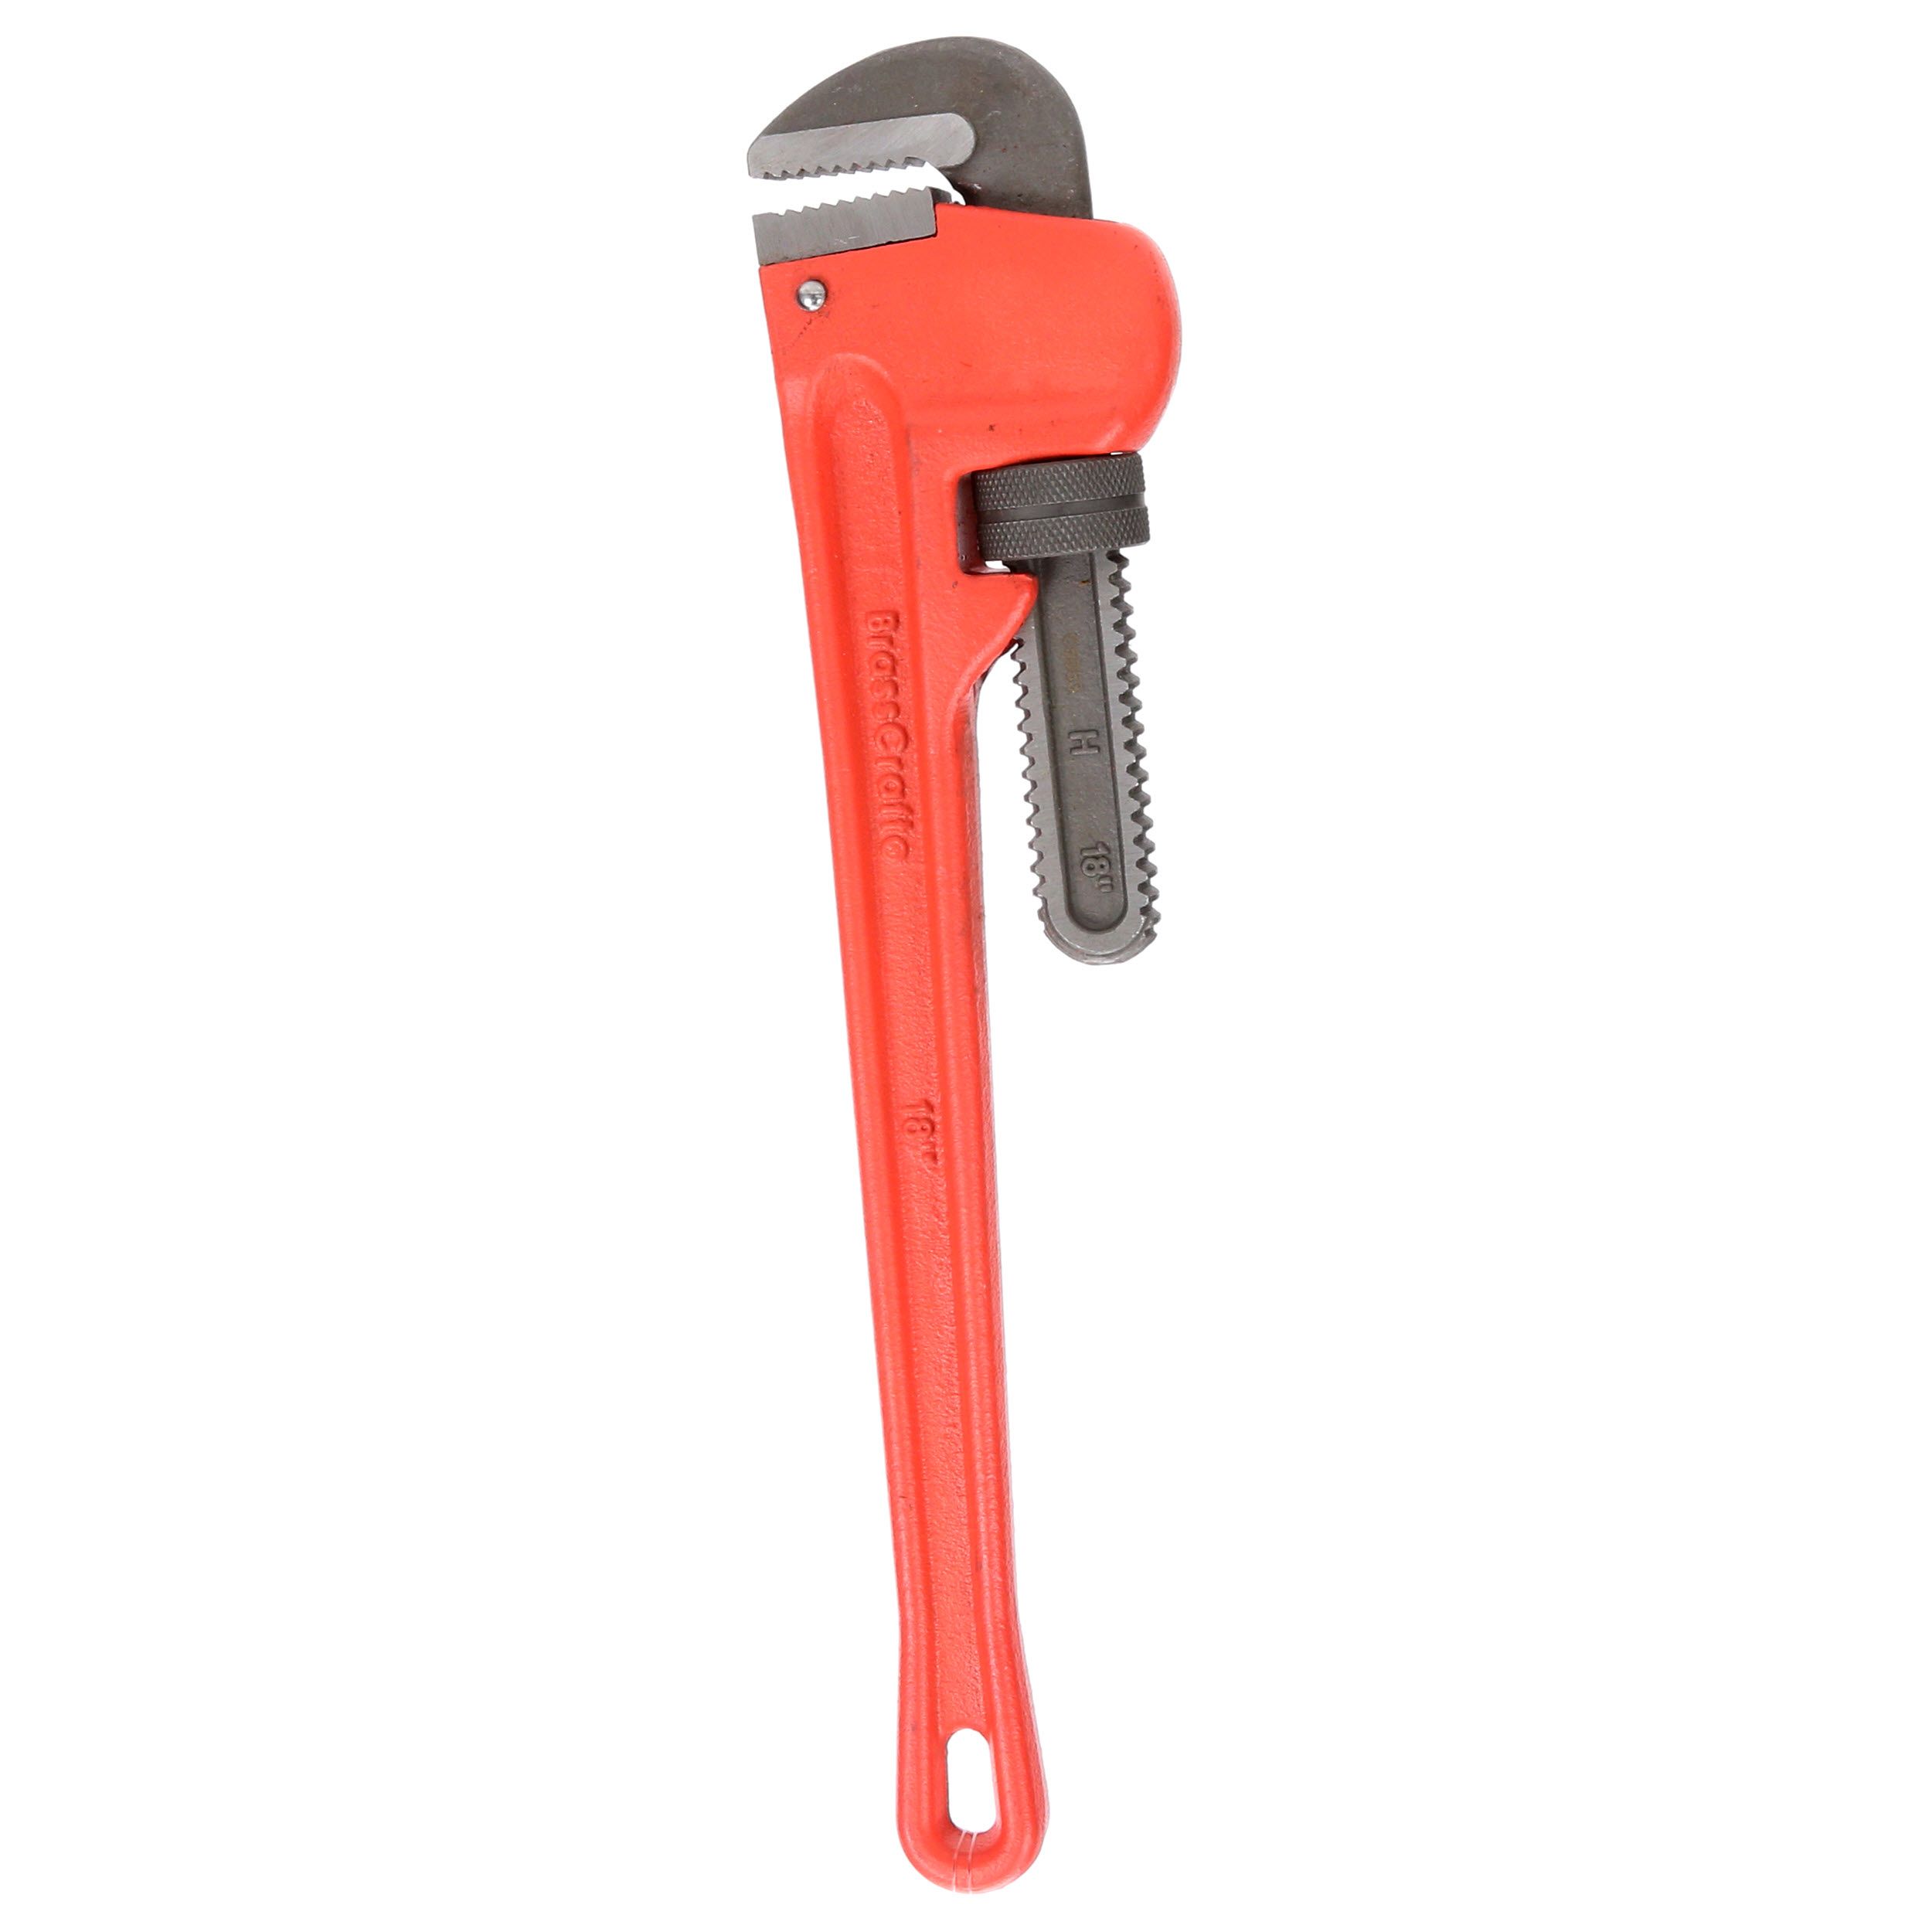 Hilka 20900018 Pro Craft Heavy Duty Pipe Wrench 